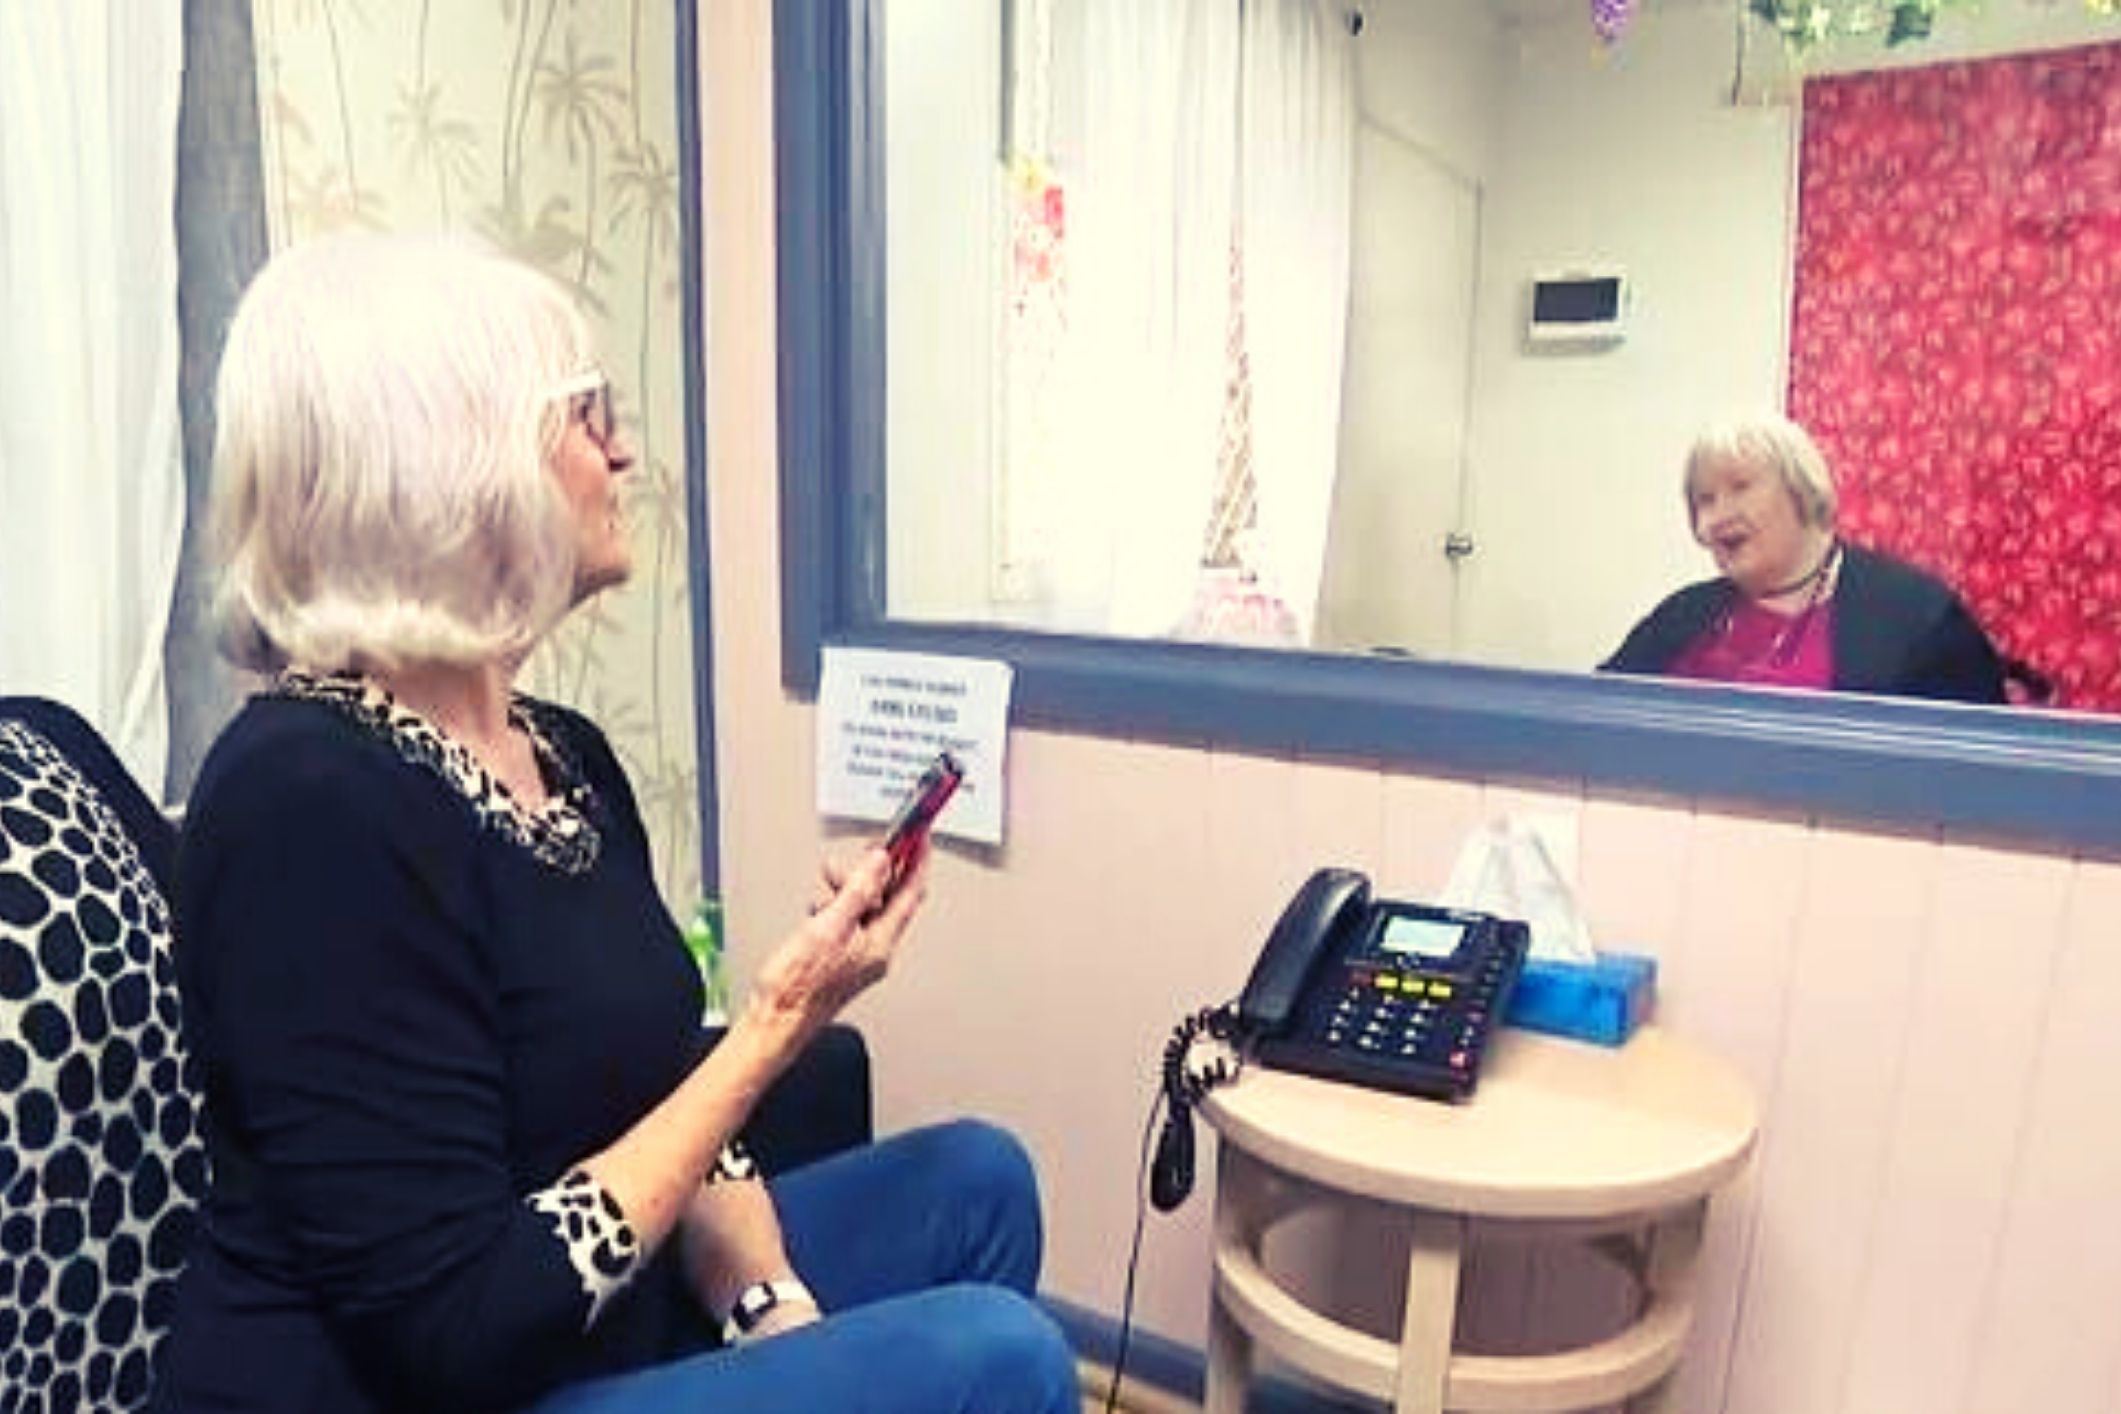 ‘Visitor Pods’ have turned nursing home car parks into contactless visiting rooms